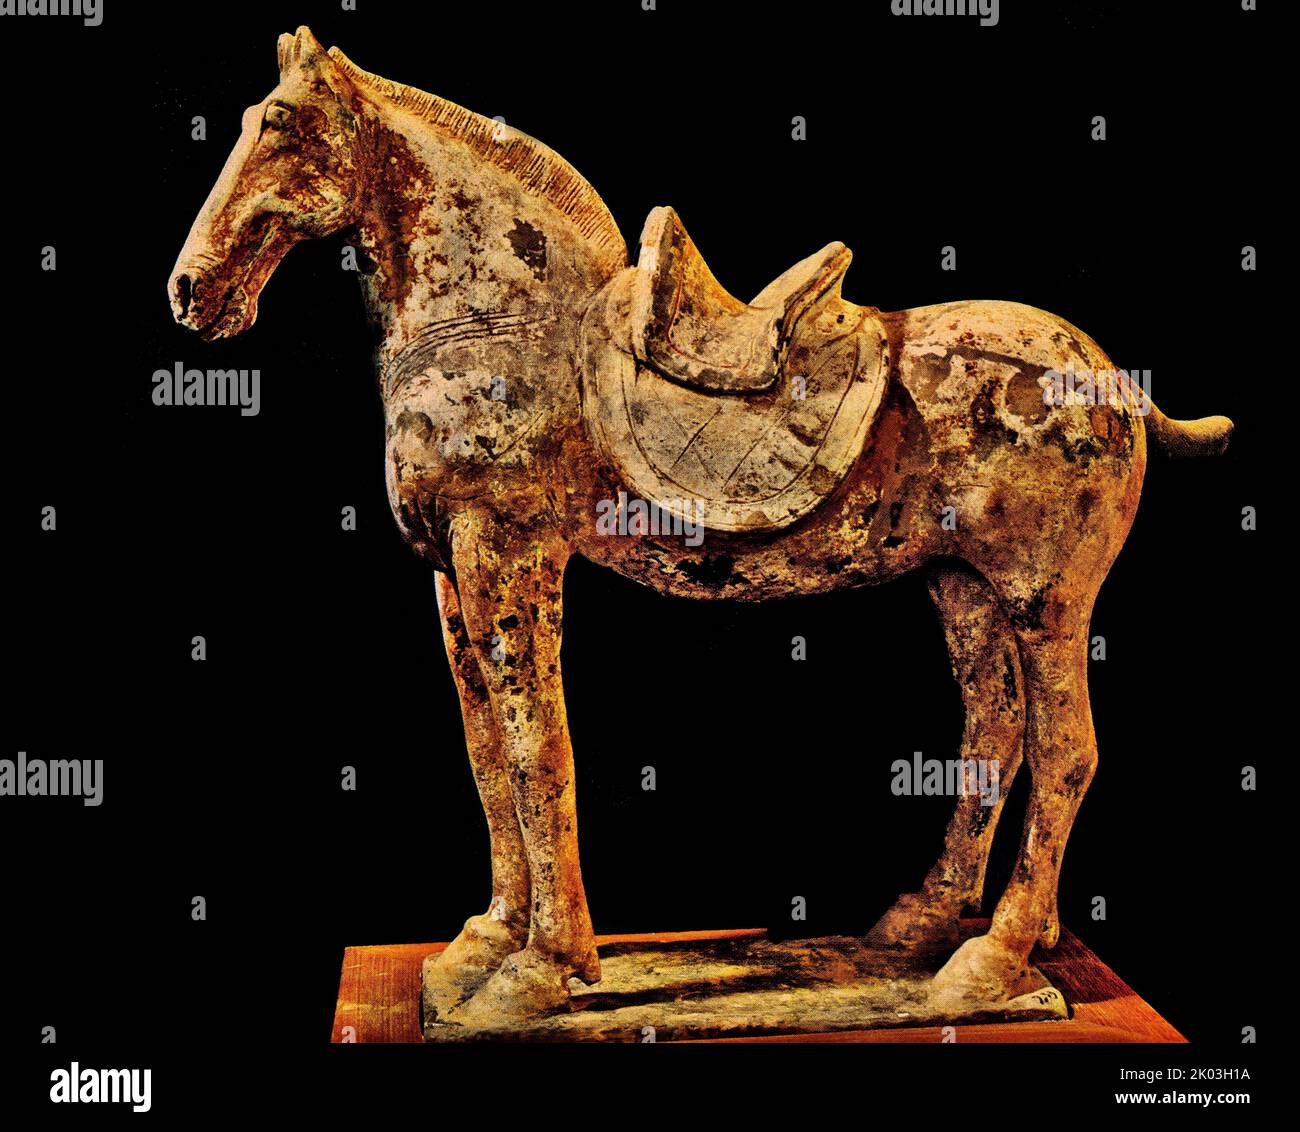 Northern Wei Dynasty figurine of a horse standing, stocky neck, proportionately large ears, small body, long and slim legs, and twisted tail. The saddle gear and body are incised with lines for decoration to render a realistic appearance. The red pigments and white coat have faded and chipped away, other colours spot the surface due to chemical reactions. Stock Photo